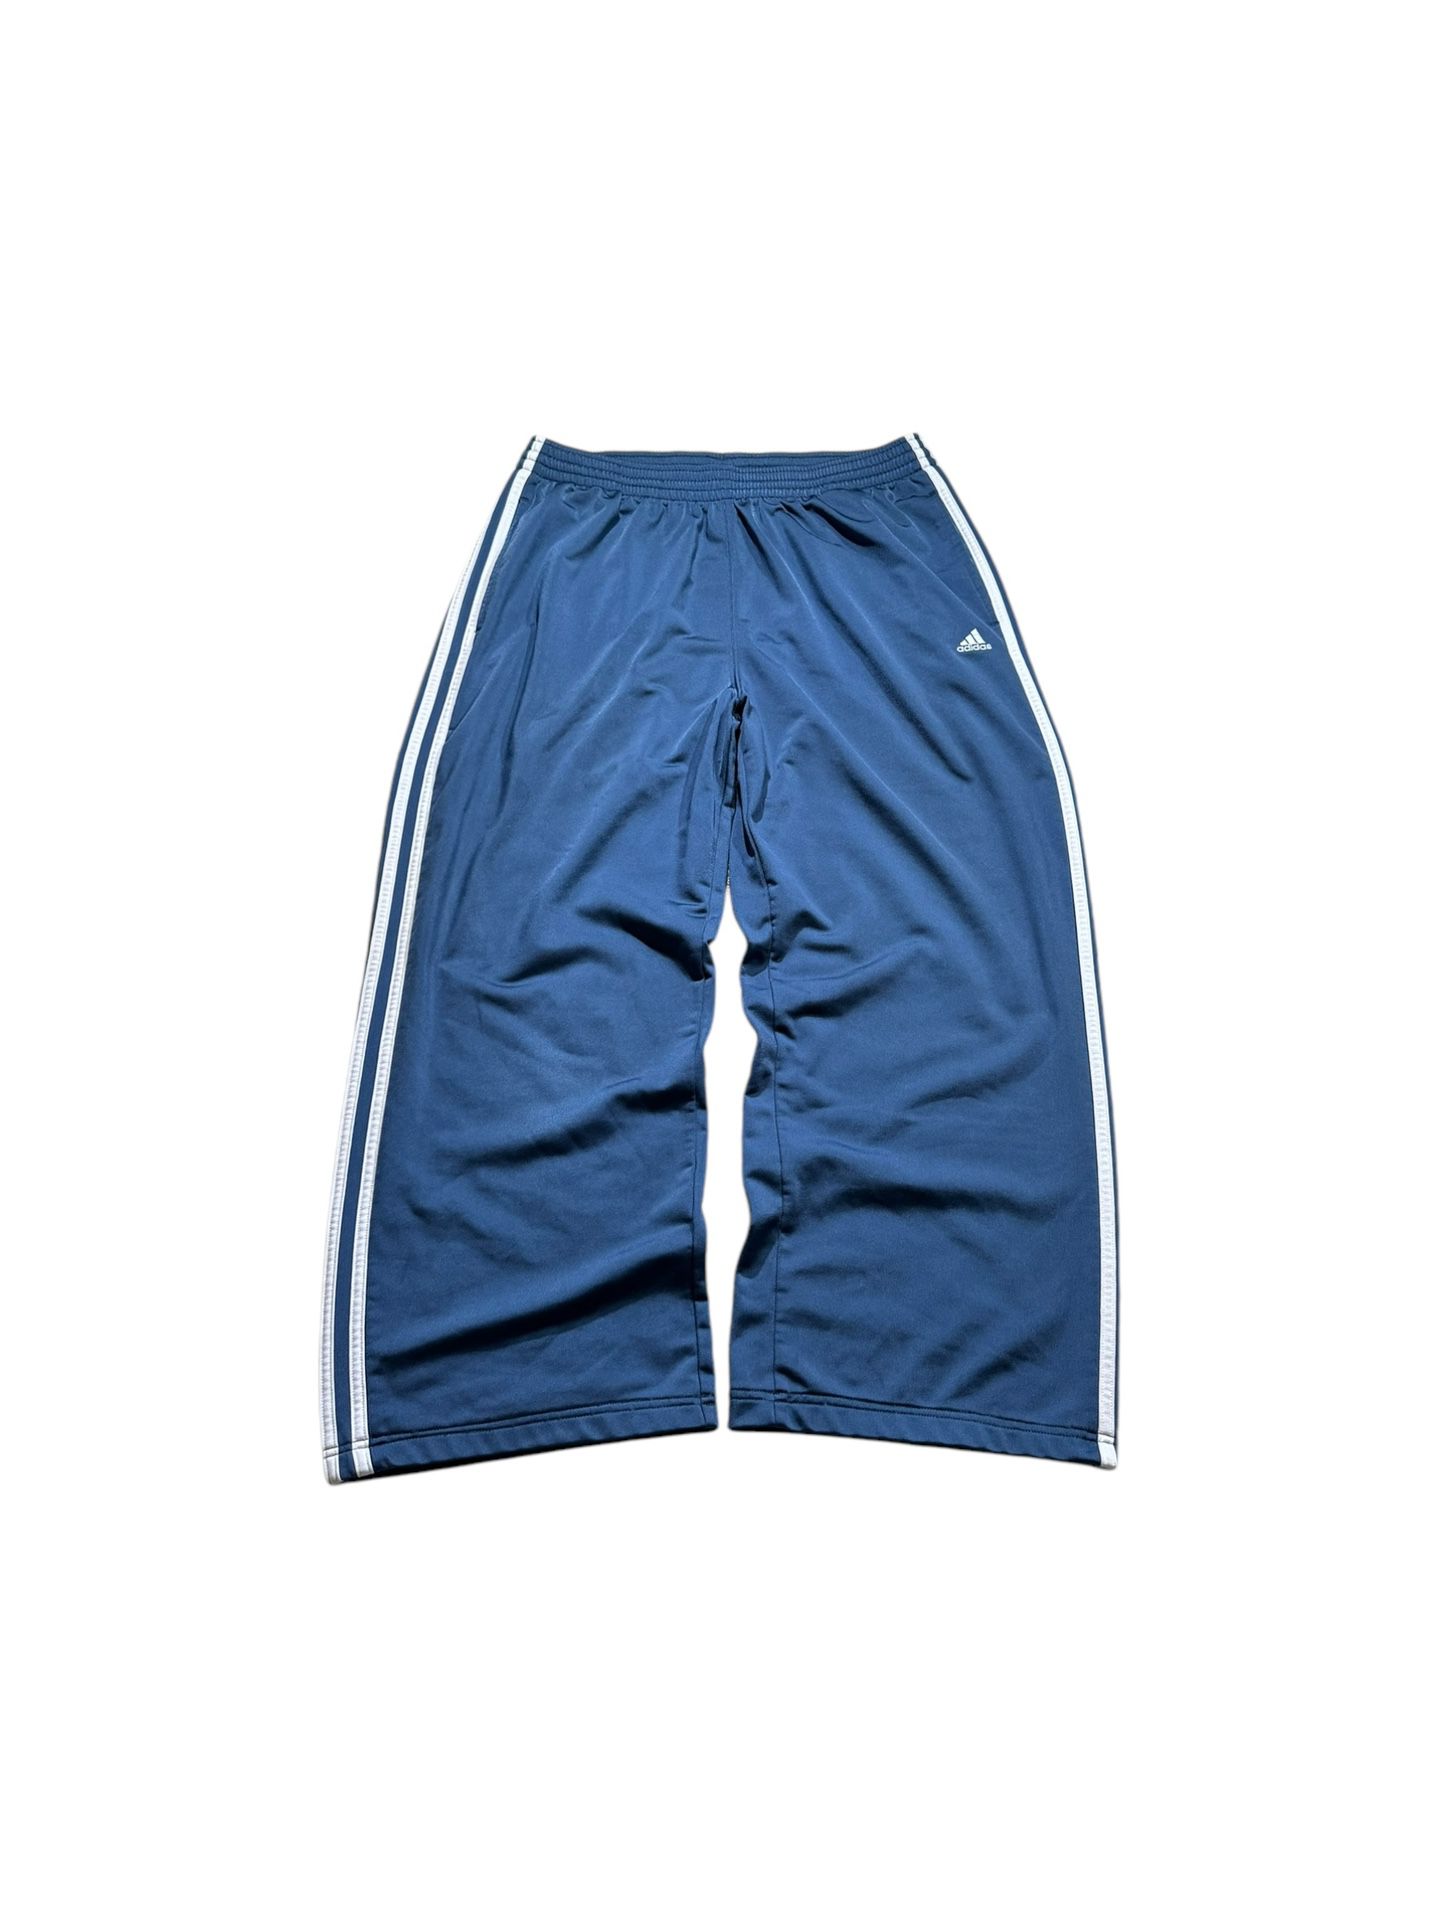 Early 2000s Adidas Classic Track Pants